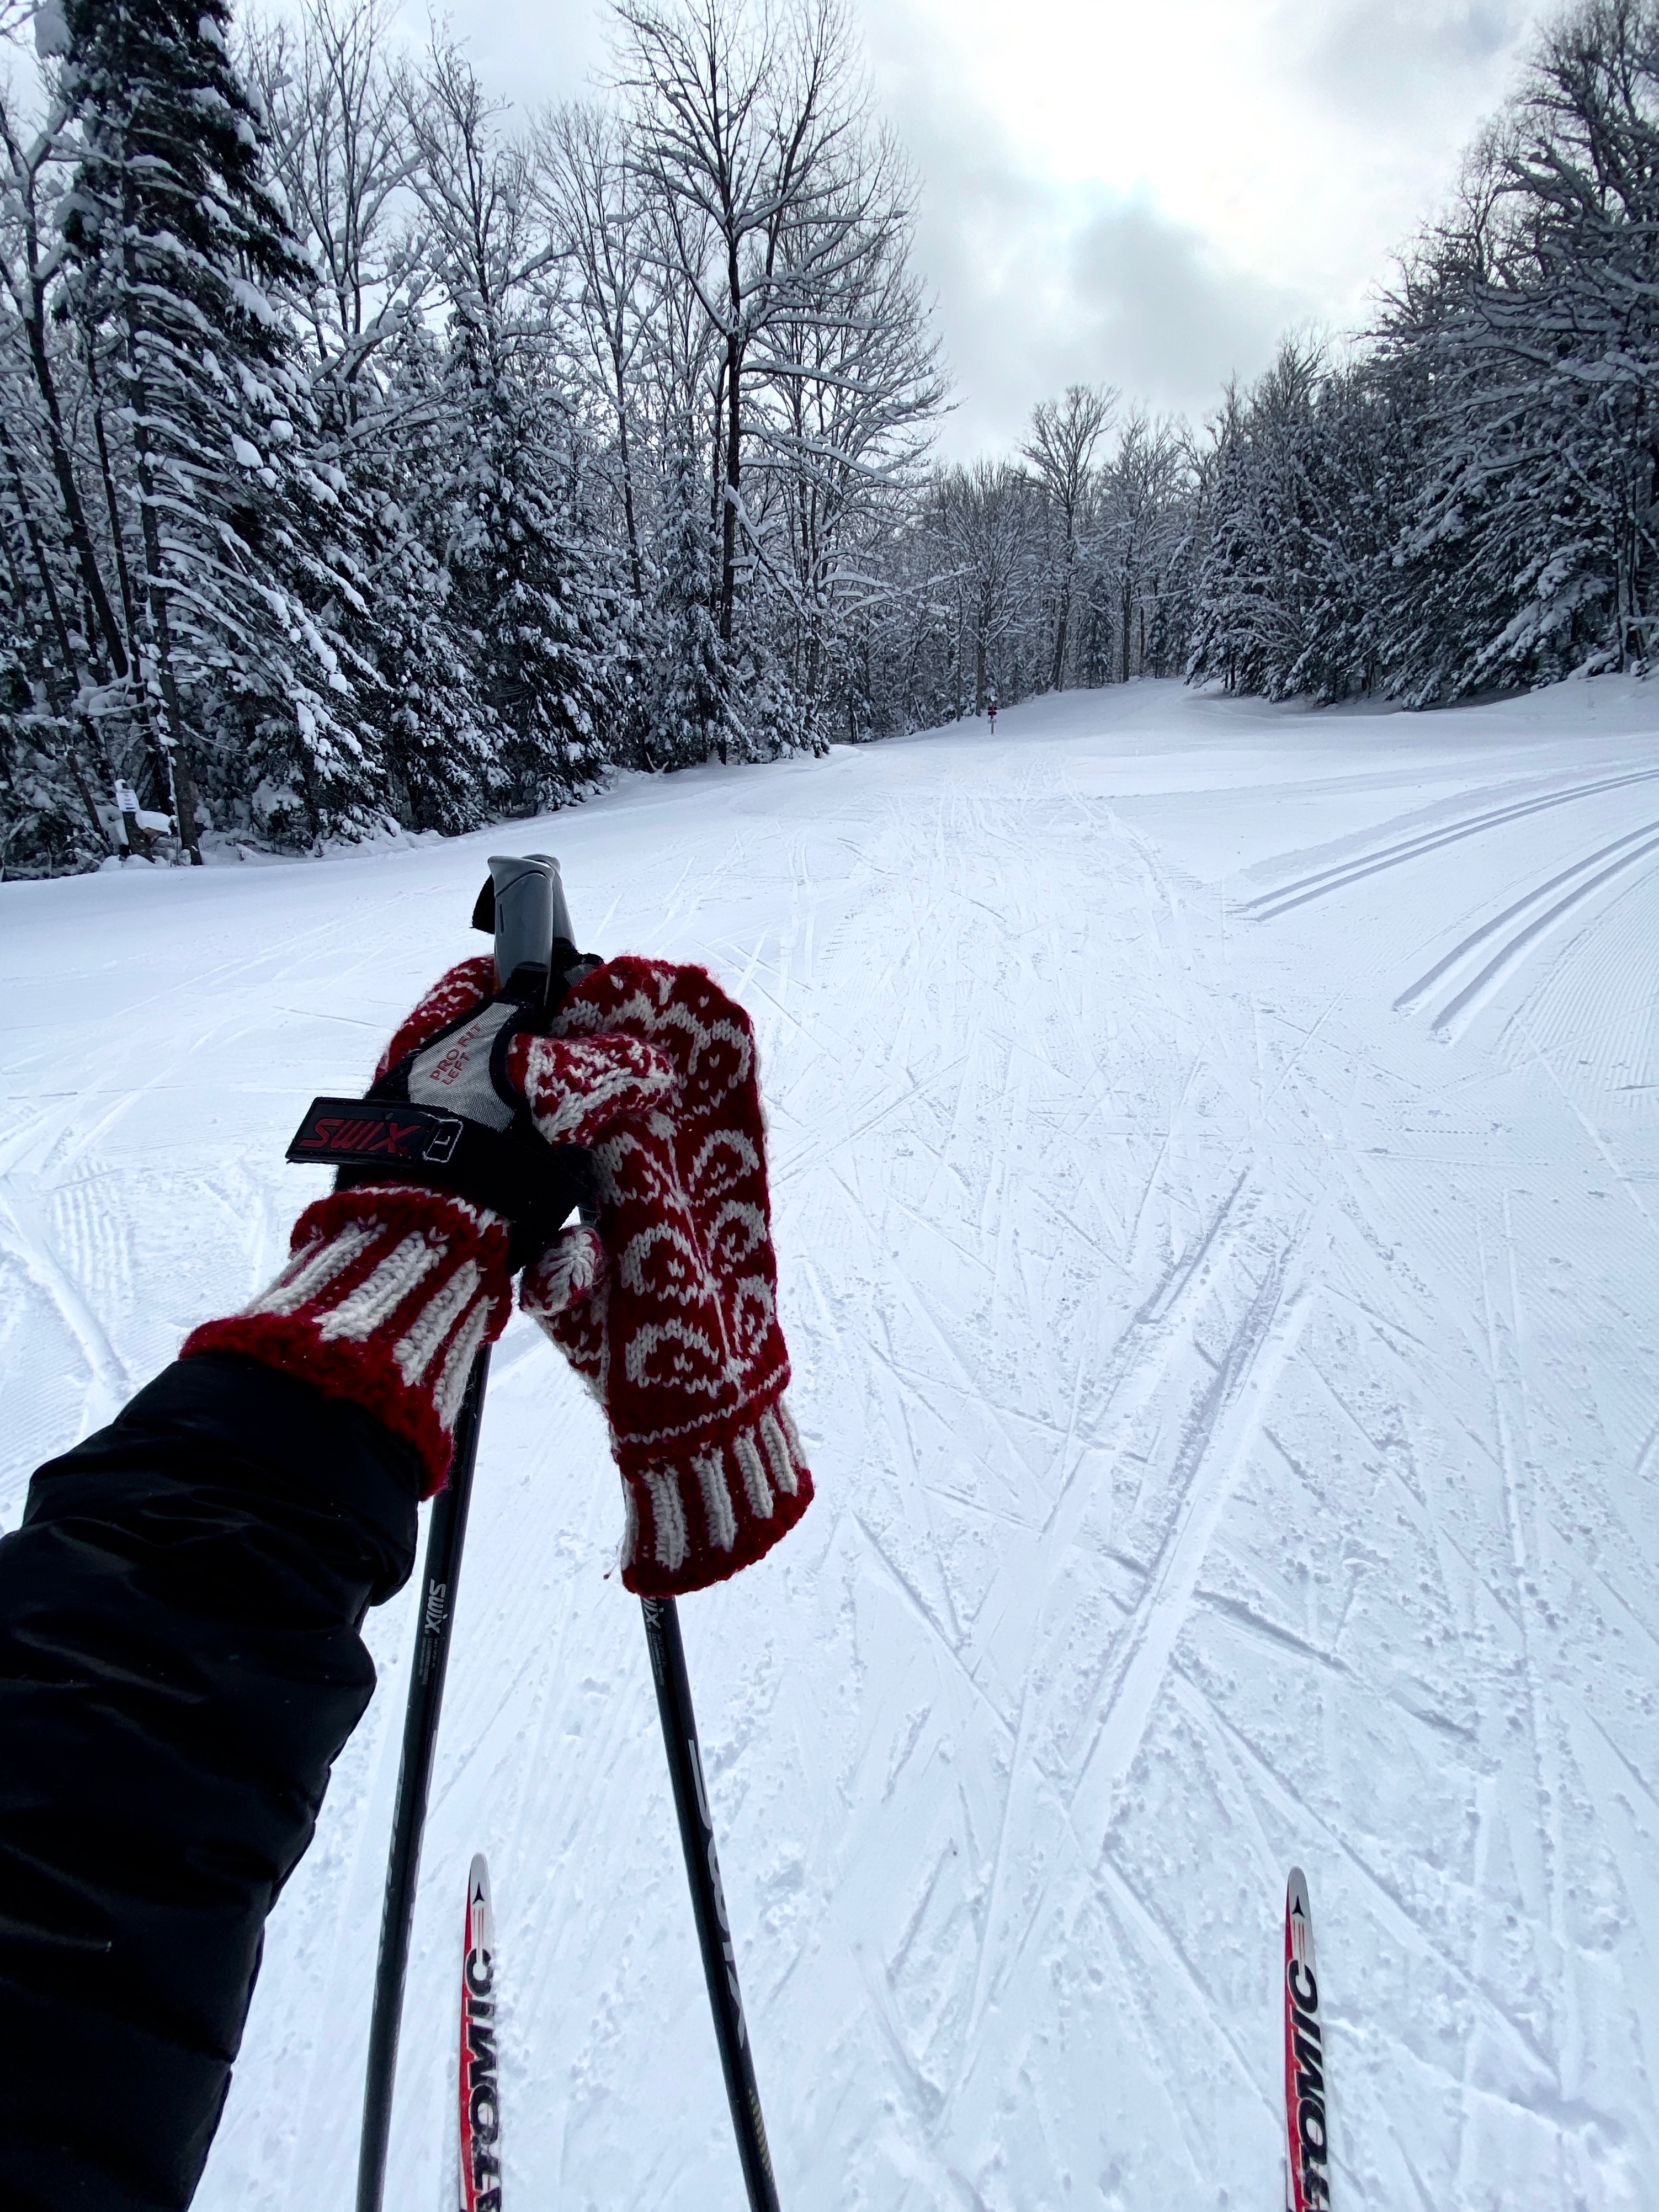 View of cross-country ski trail in winter.